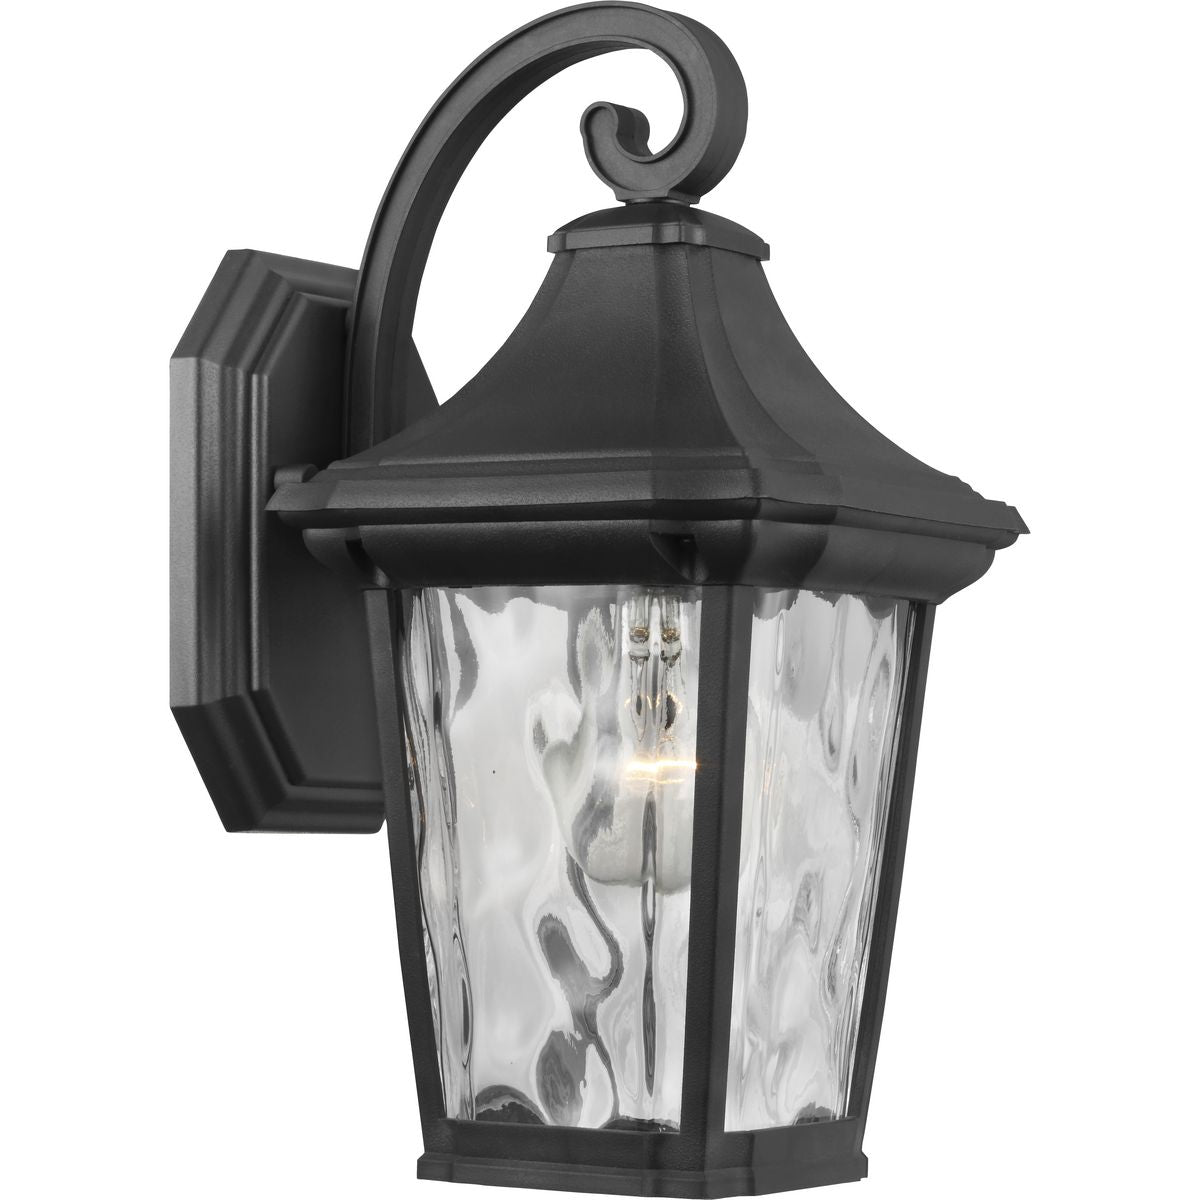 Marquette Outdoor Wall Light